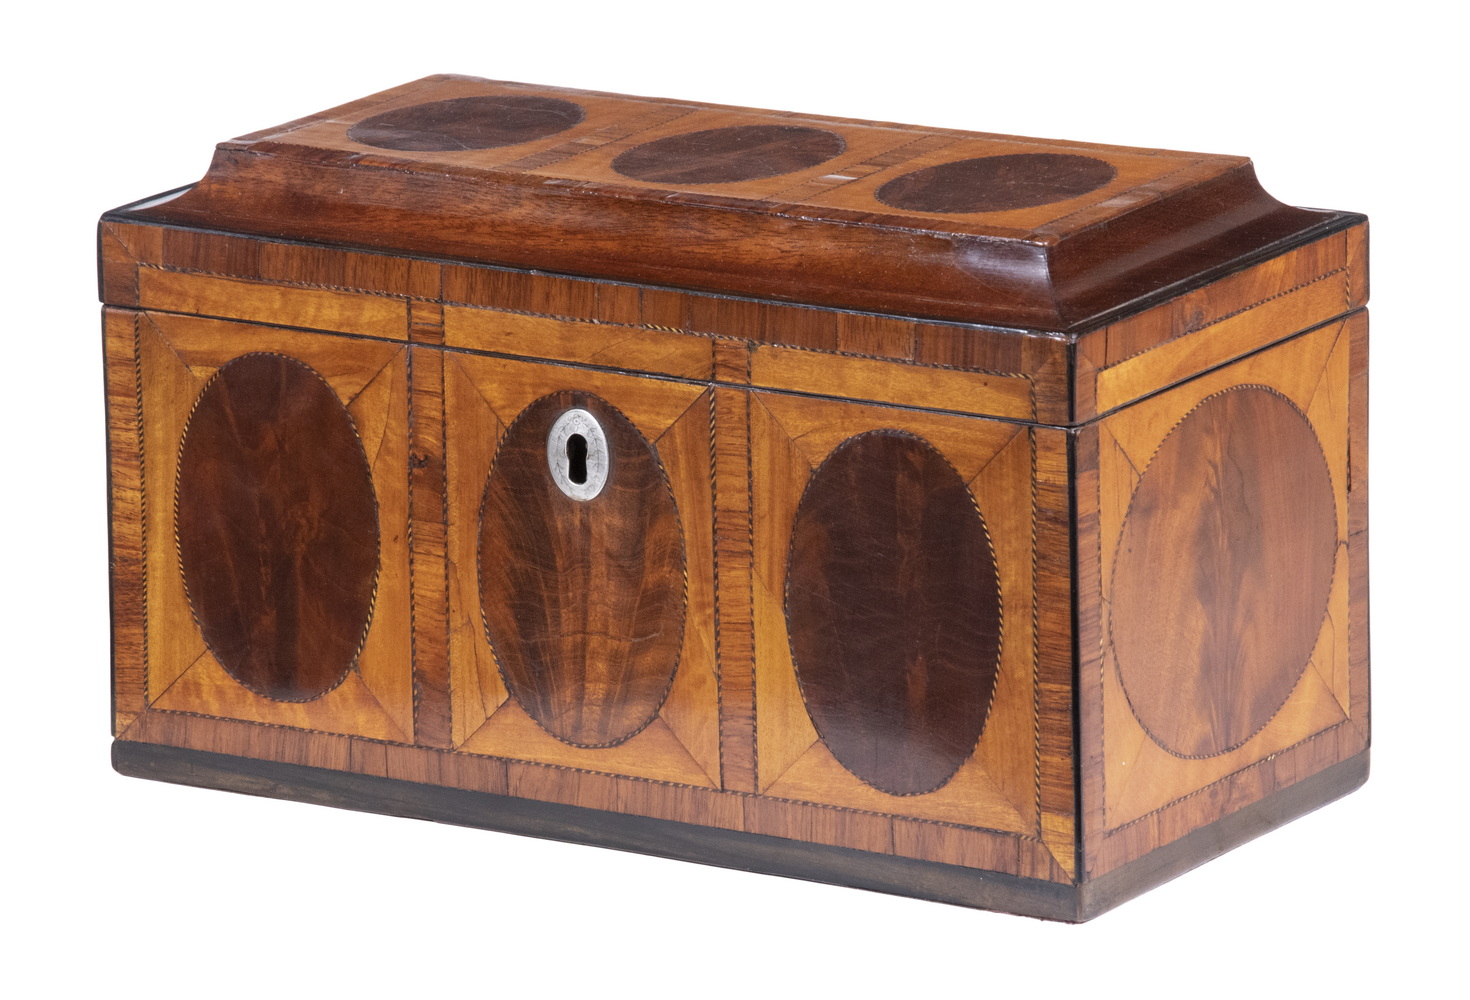 TEA CADDY WITH INLAID OVAL PANELS 2b3c01